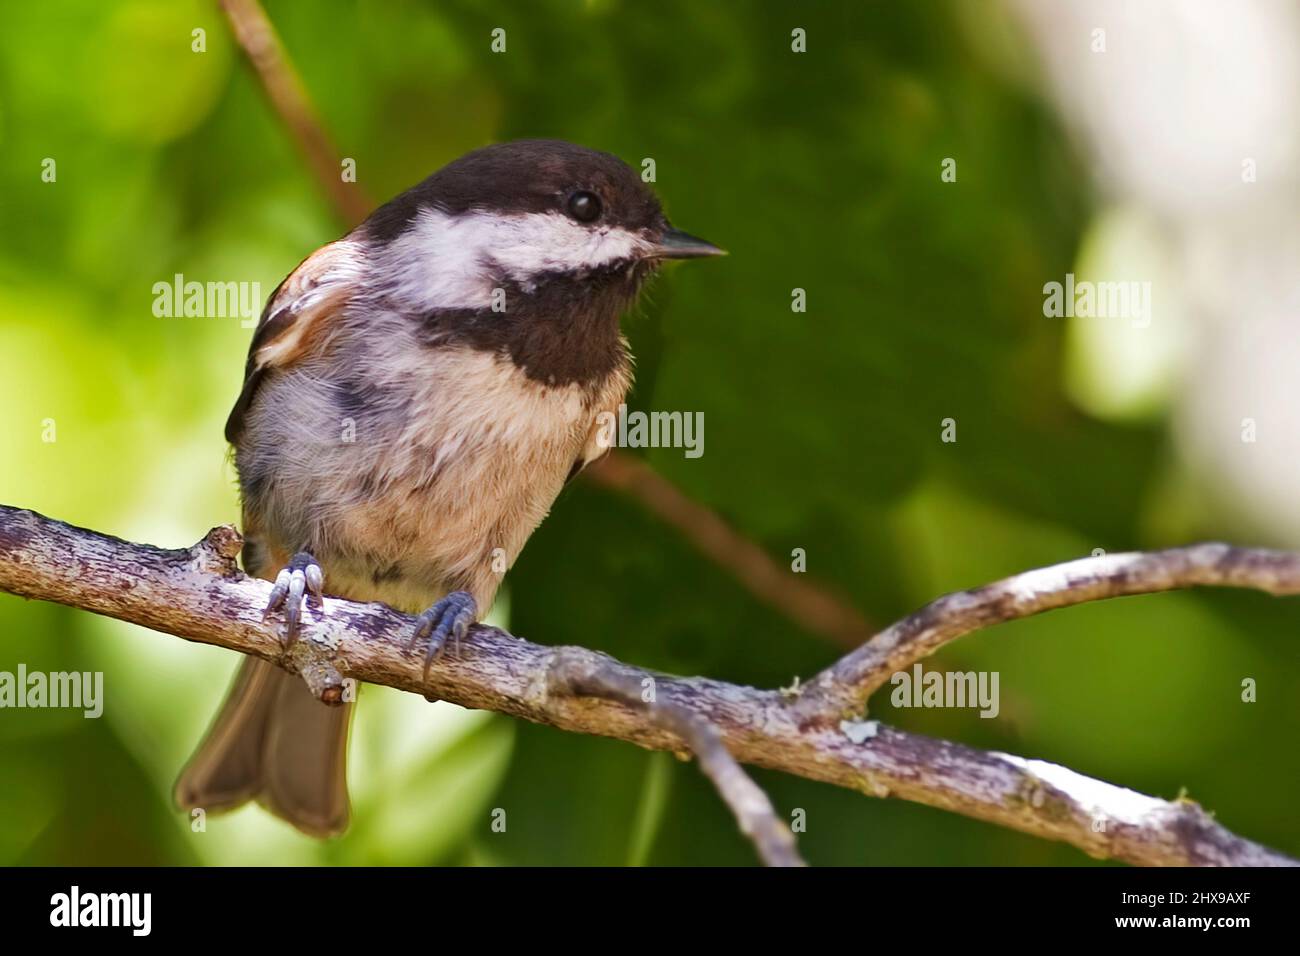 A Chestnut-backed Chickadee, Poecile rufescens, perched on branch Stock Photo